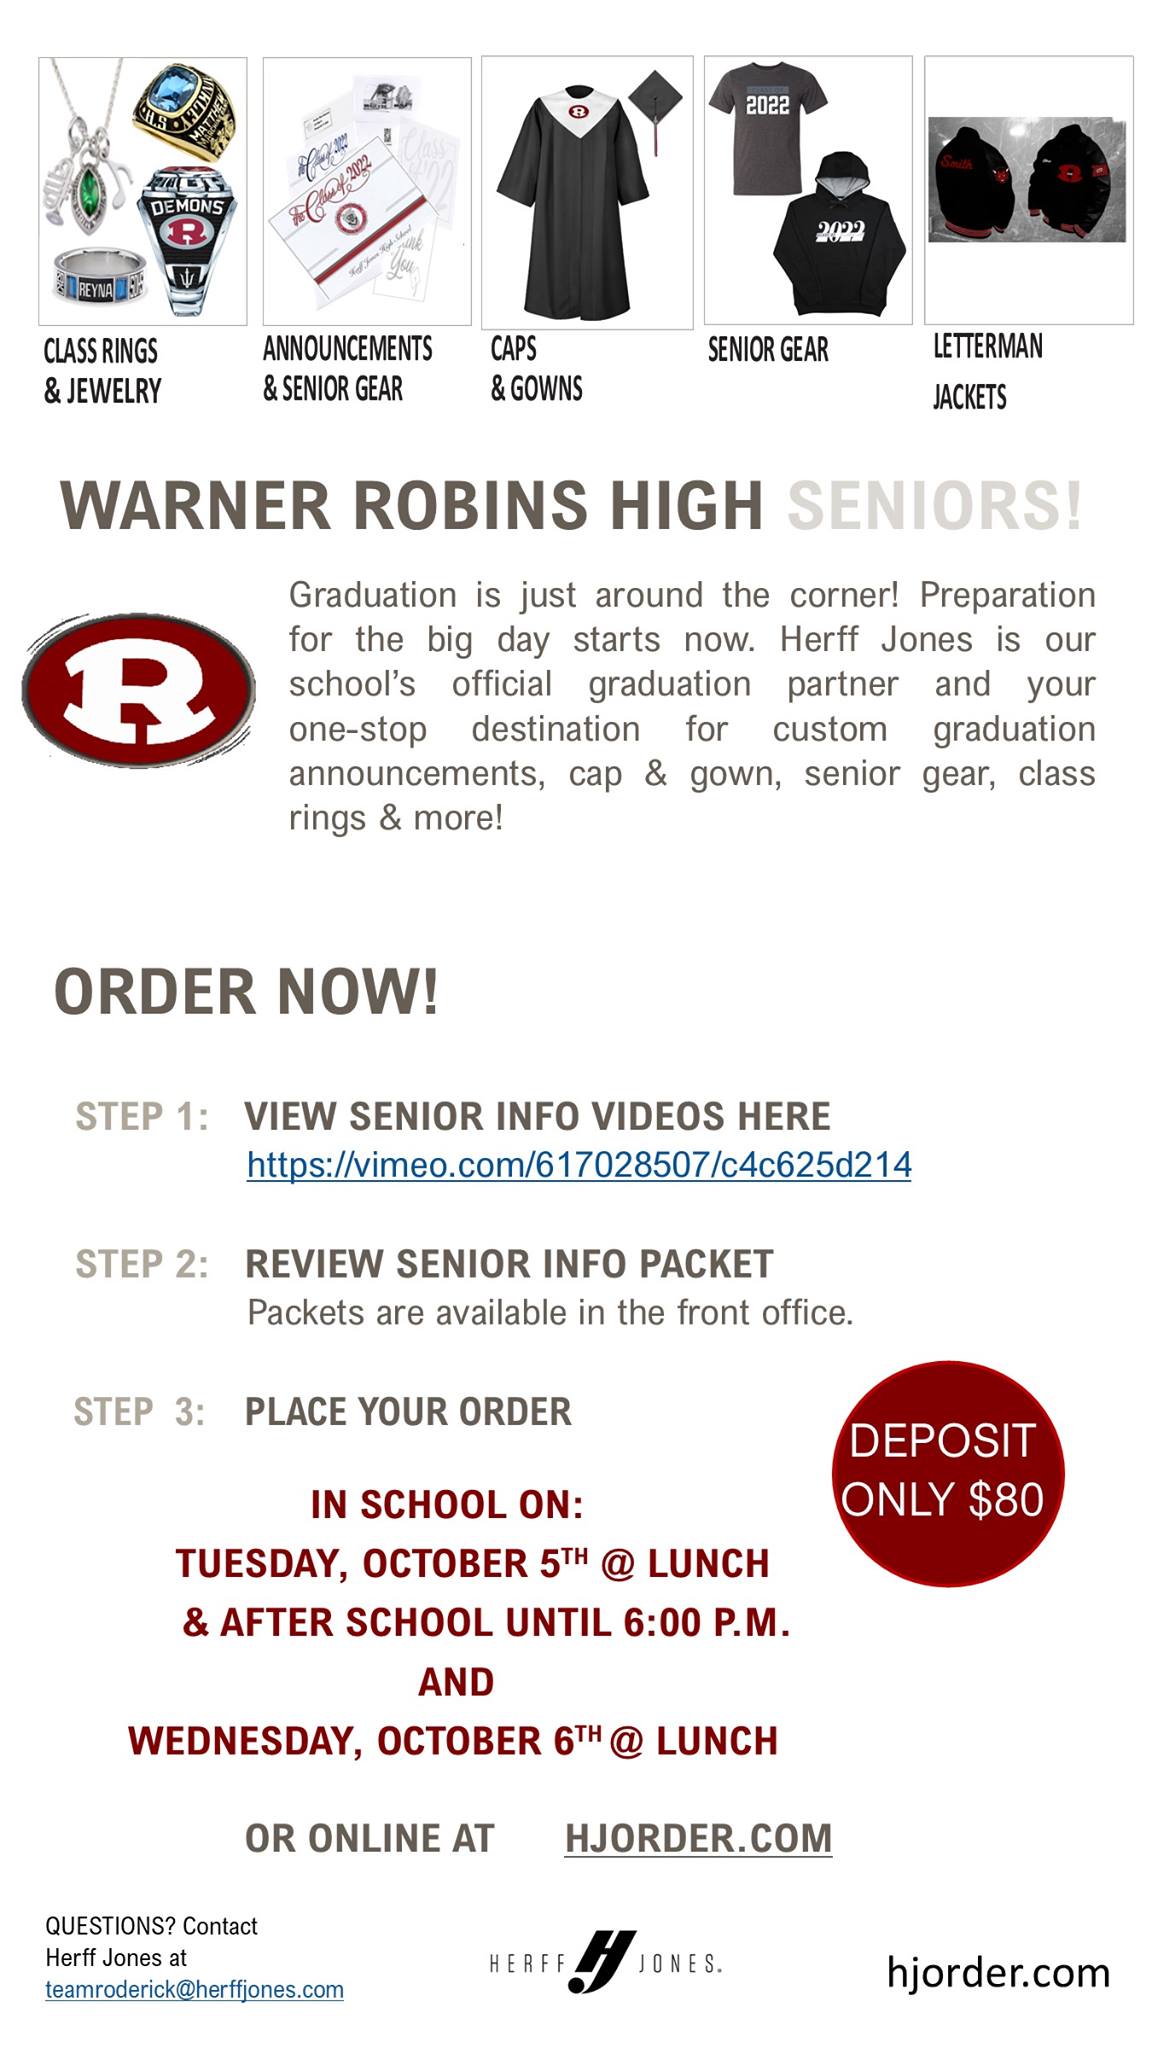 Cap and Gown Orders